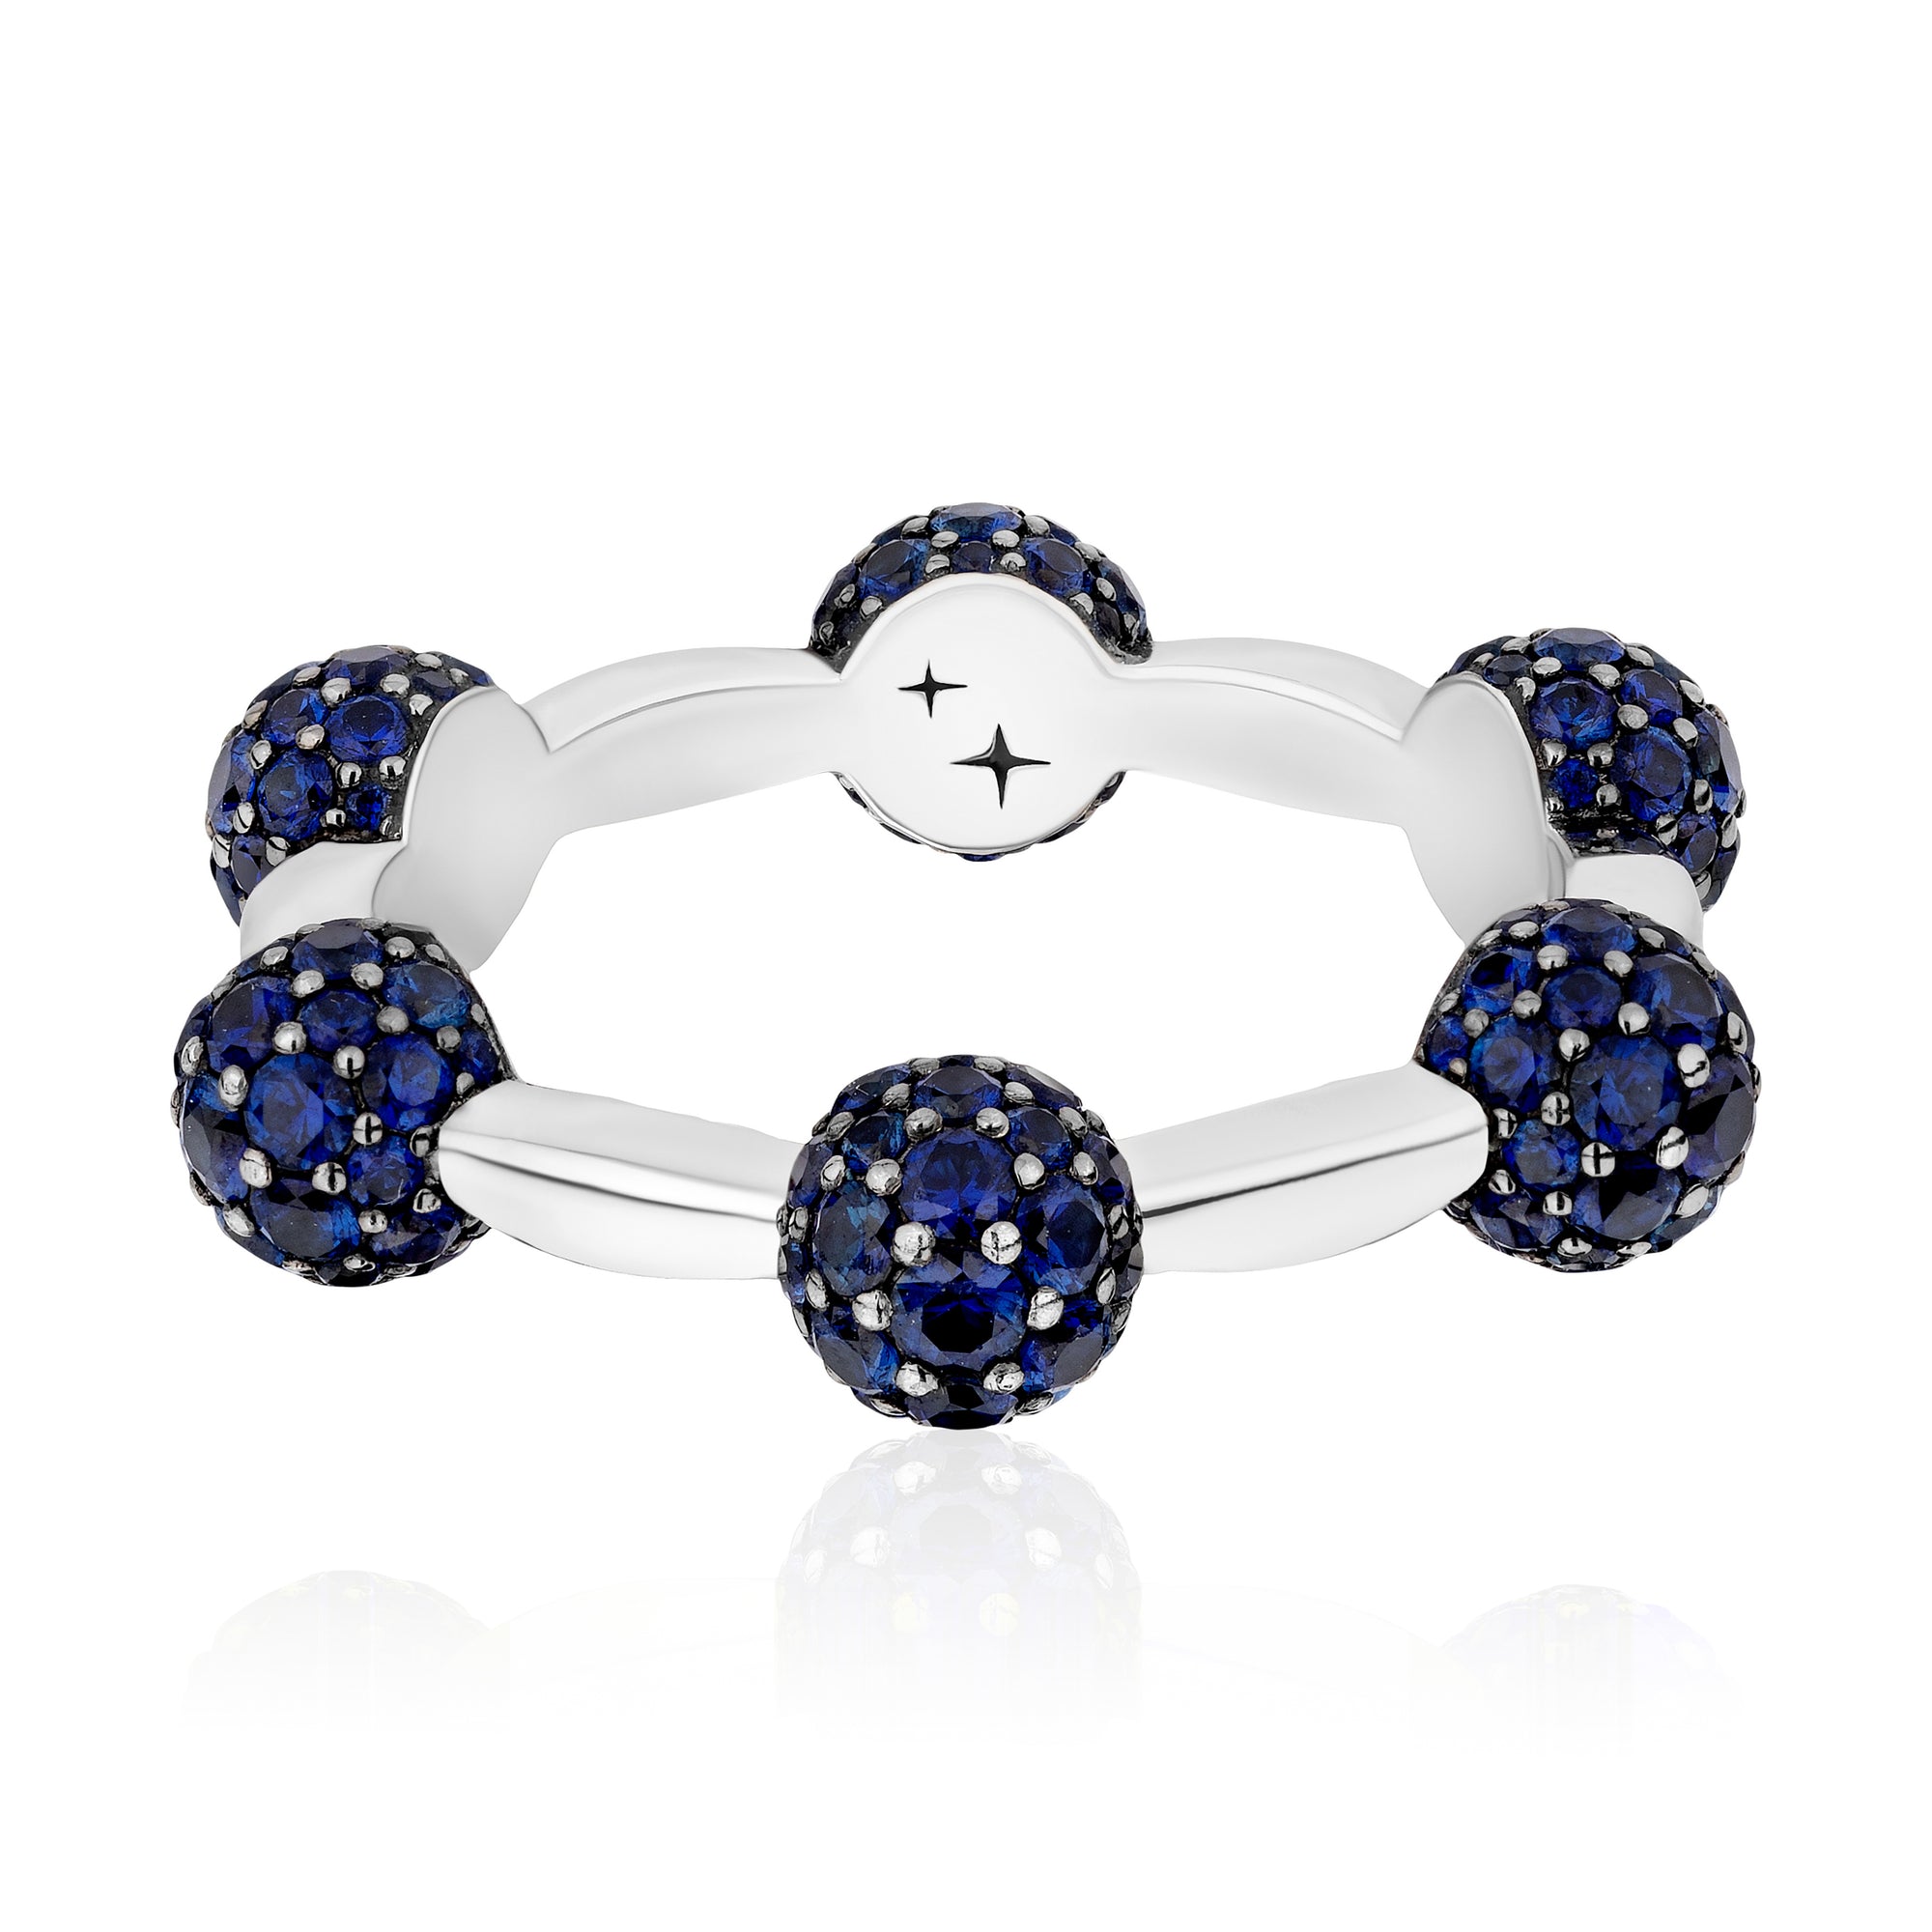 Celestial Ring in White Gold with Blue Sapphires